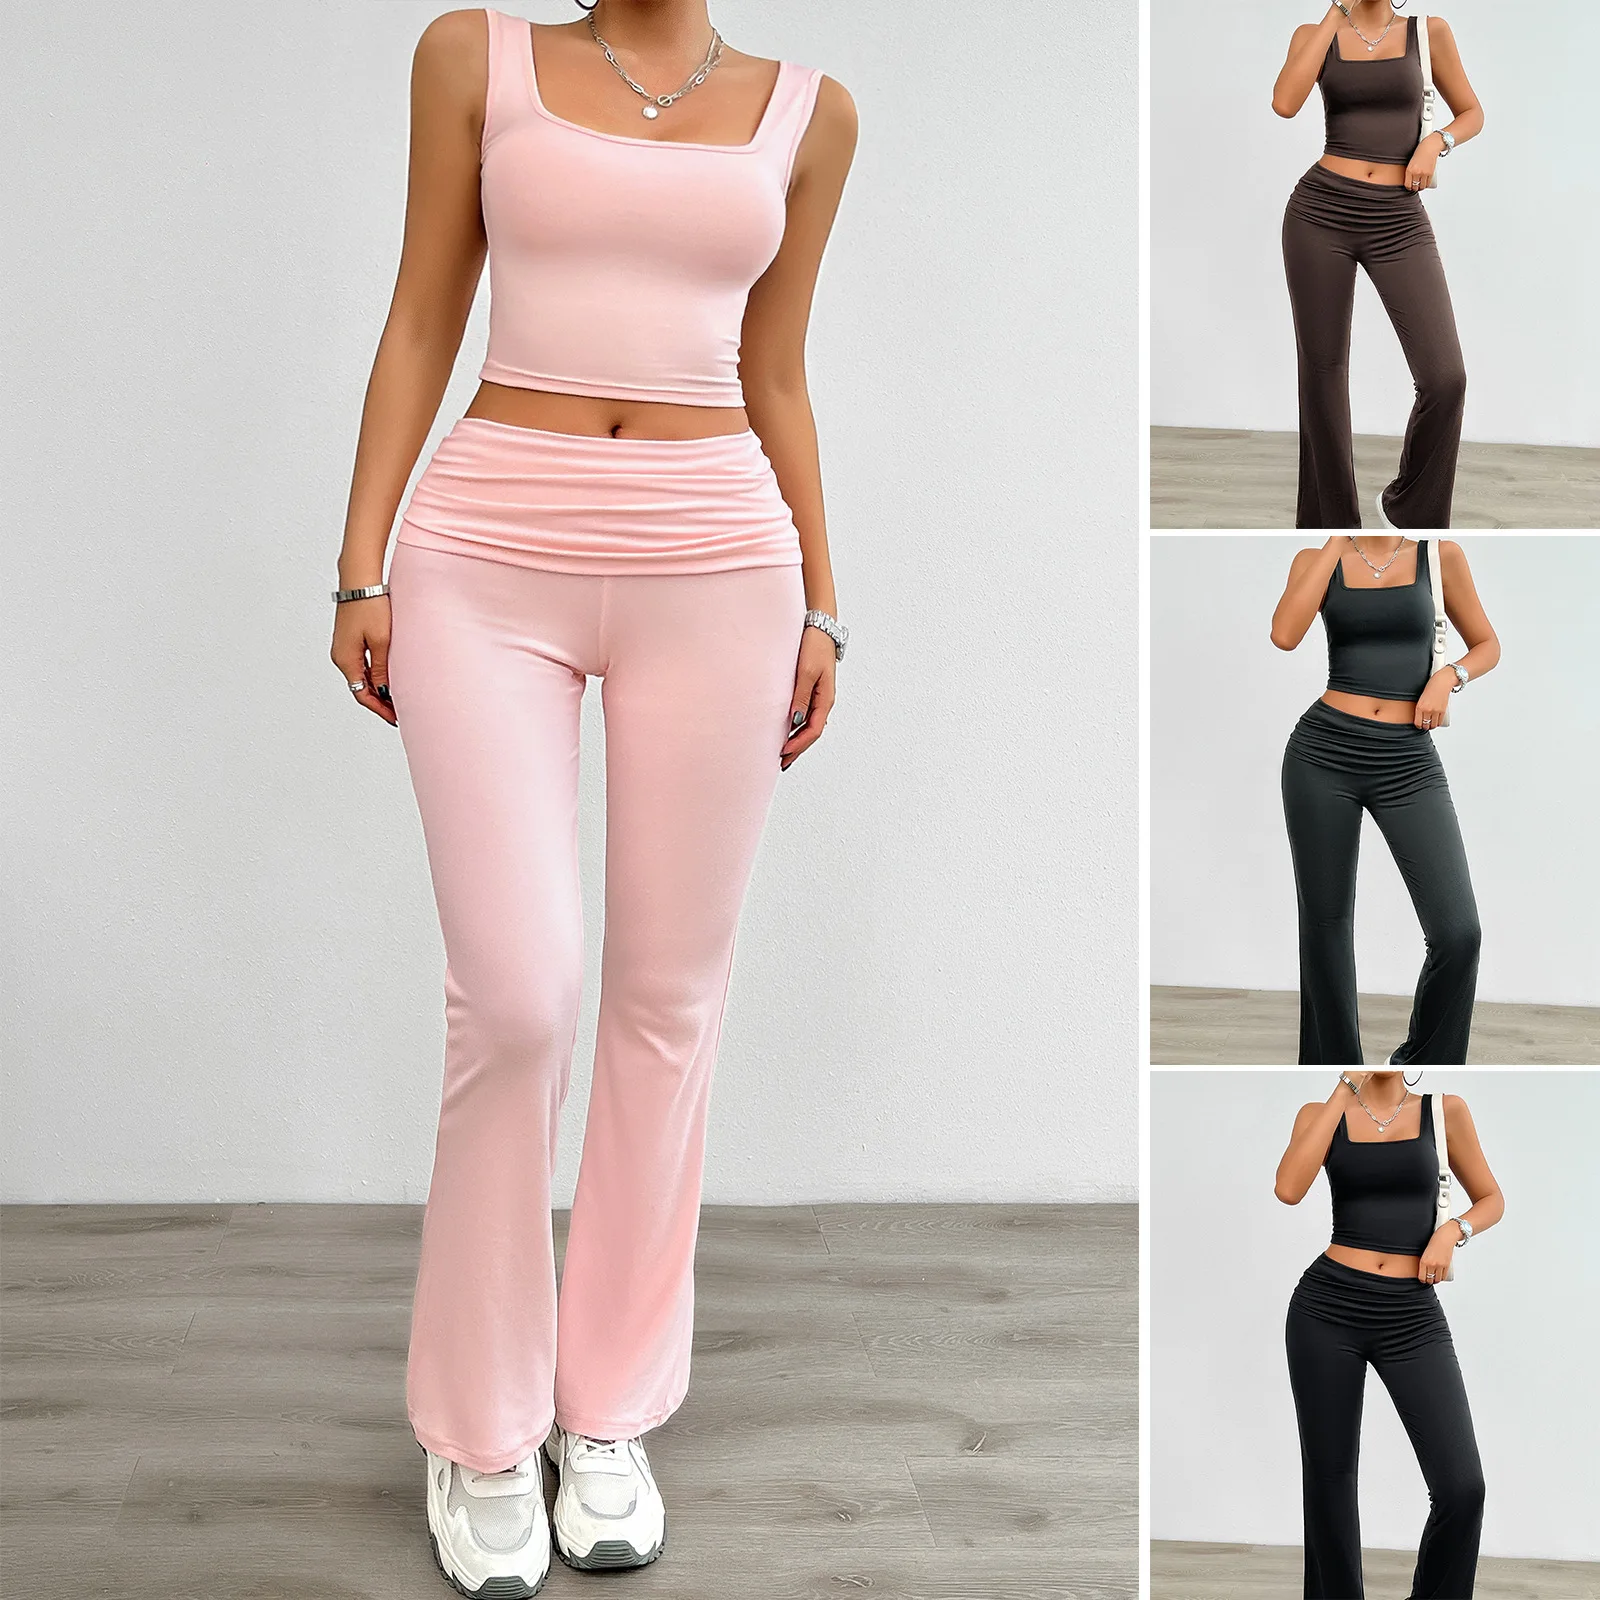 YEAE Solid Color Slim Stretch Vest Pants Set Casual Exercise Yoga Wear Camisole Top and Slim Straight Pants Set Kardashian Y2K [fila]4way stretch pants